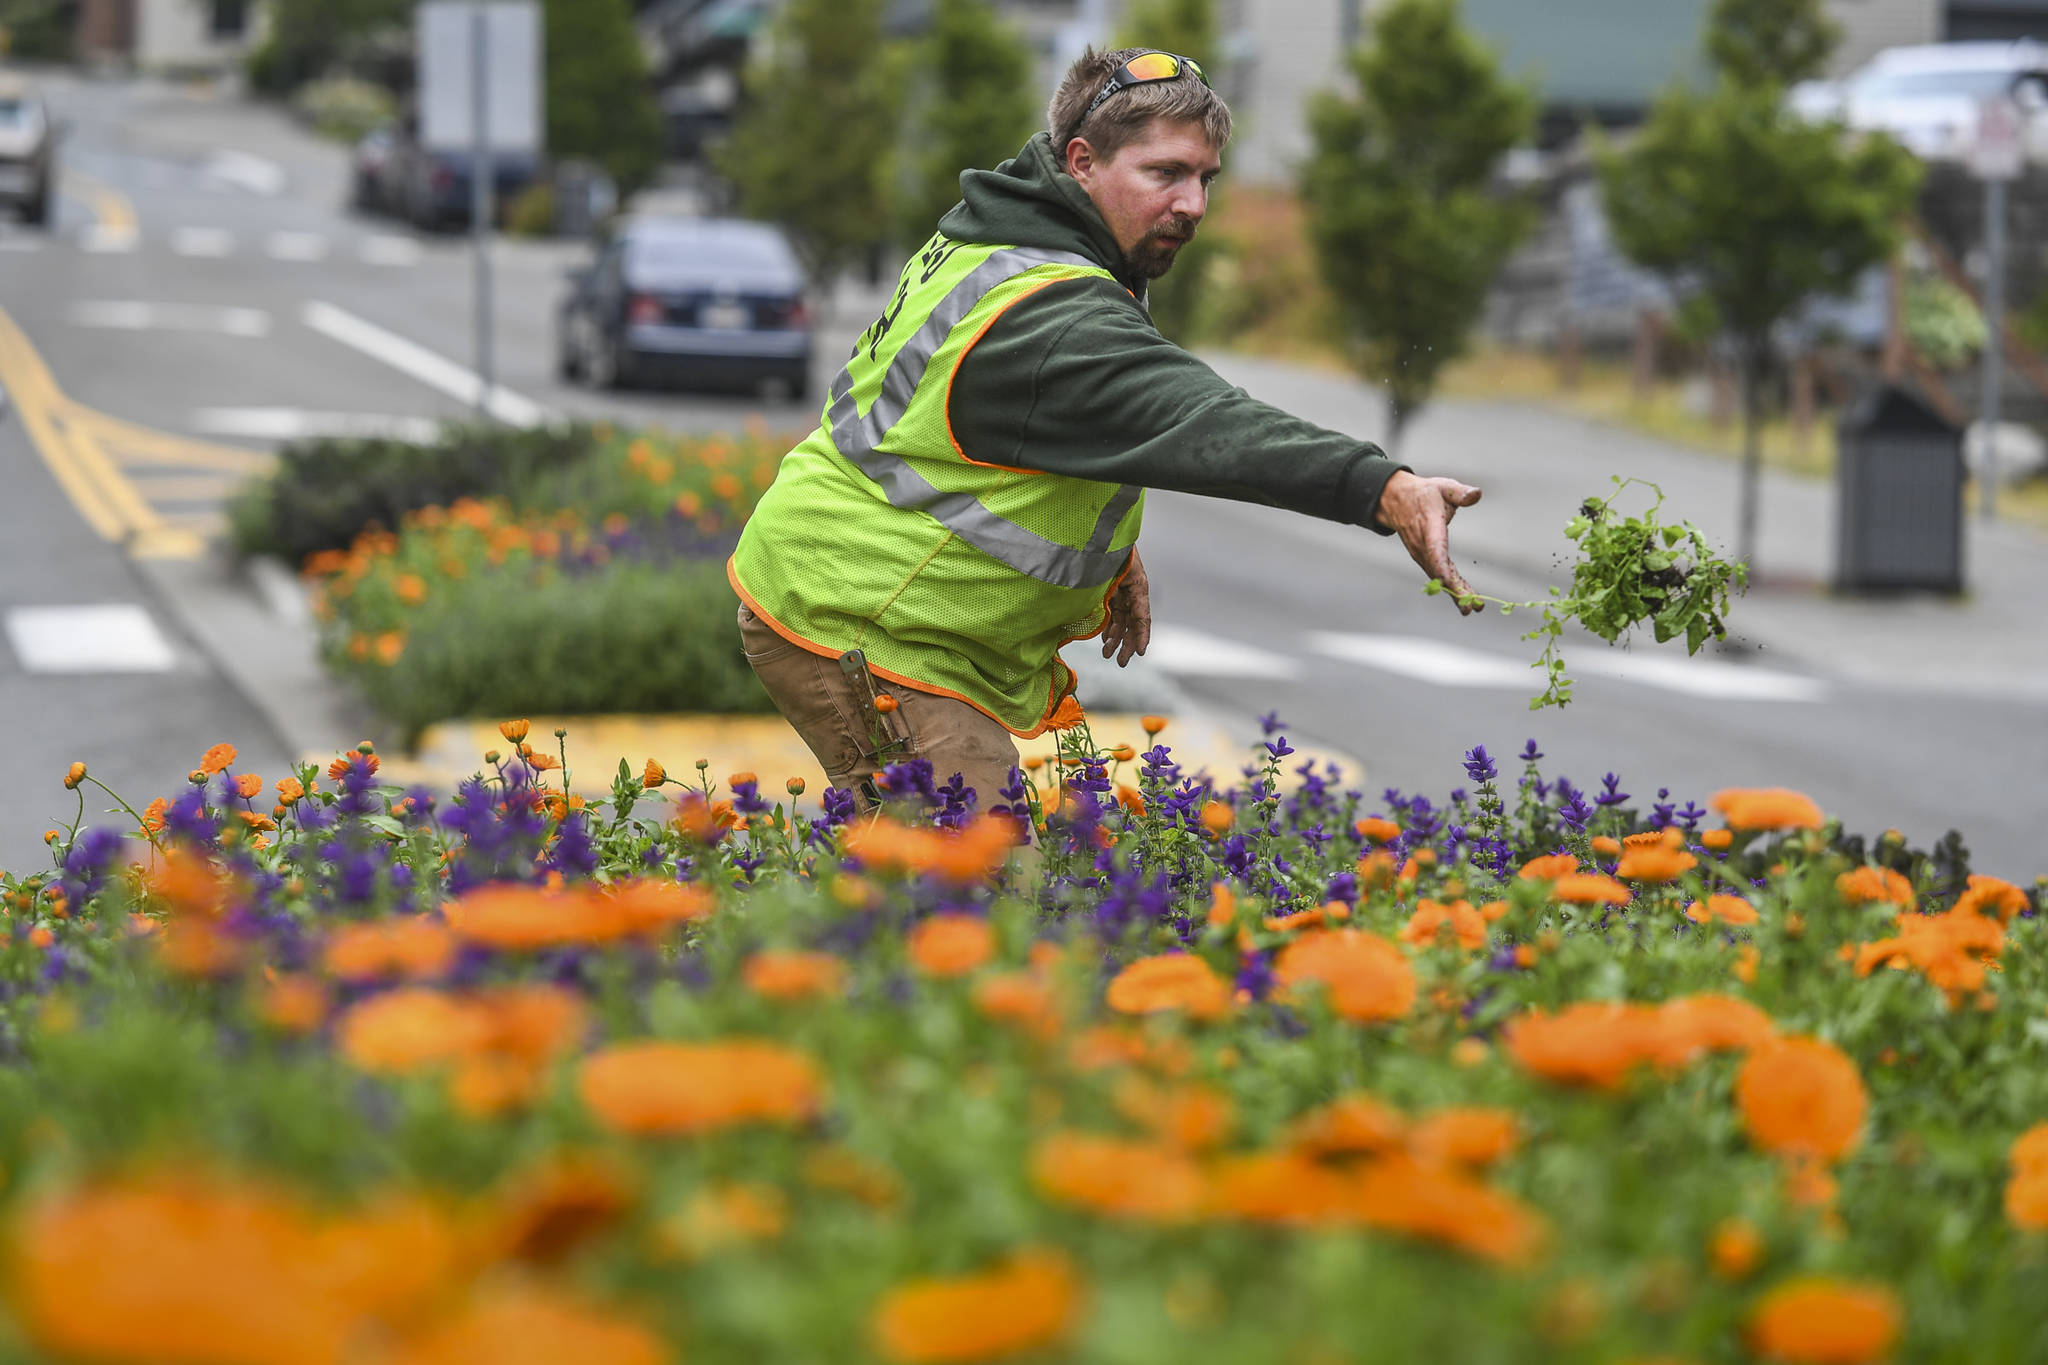 Will Nicholls, of the city’s landscaping division, deadheads flowers and pulls weeds from a Main Street median on Friday, July 12, 2019. (Michael Penn | Juneau Empire)